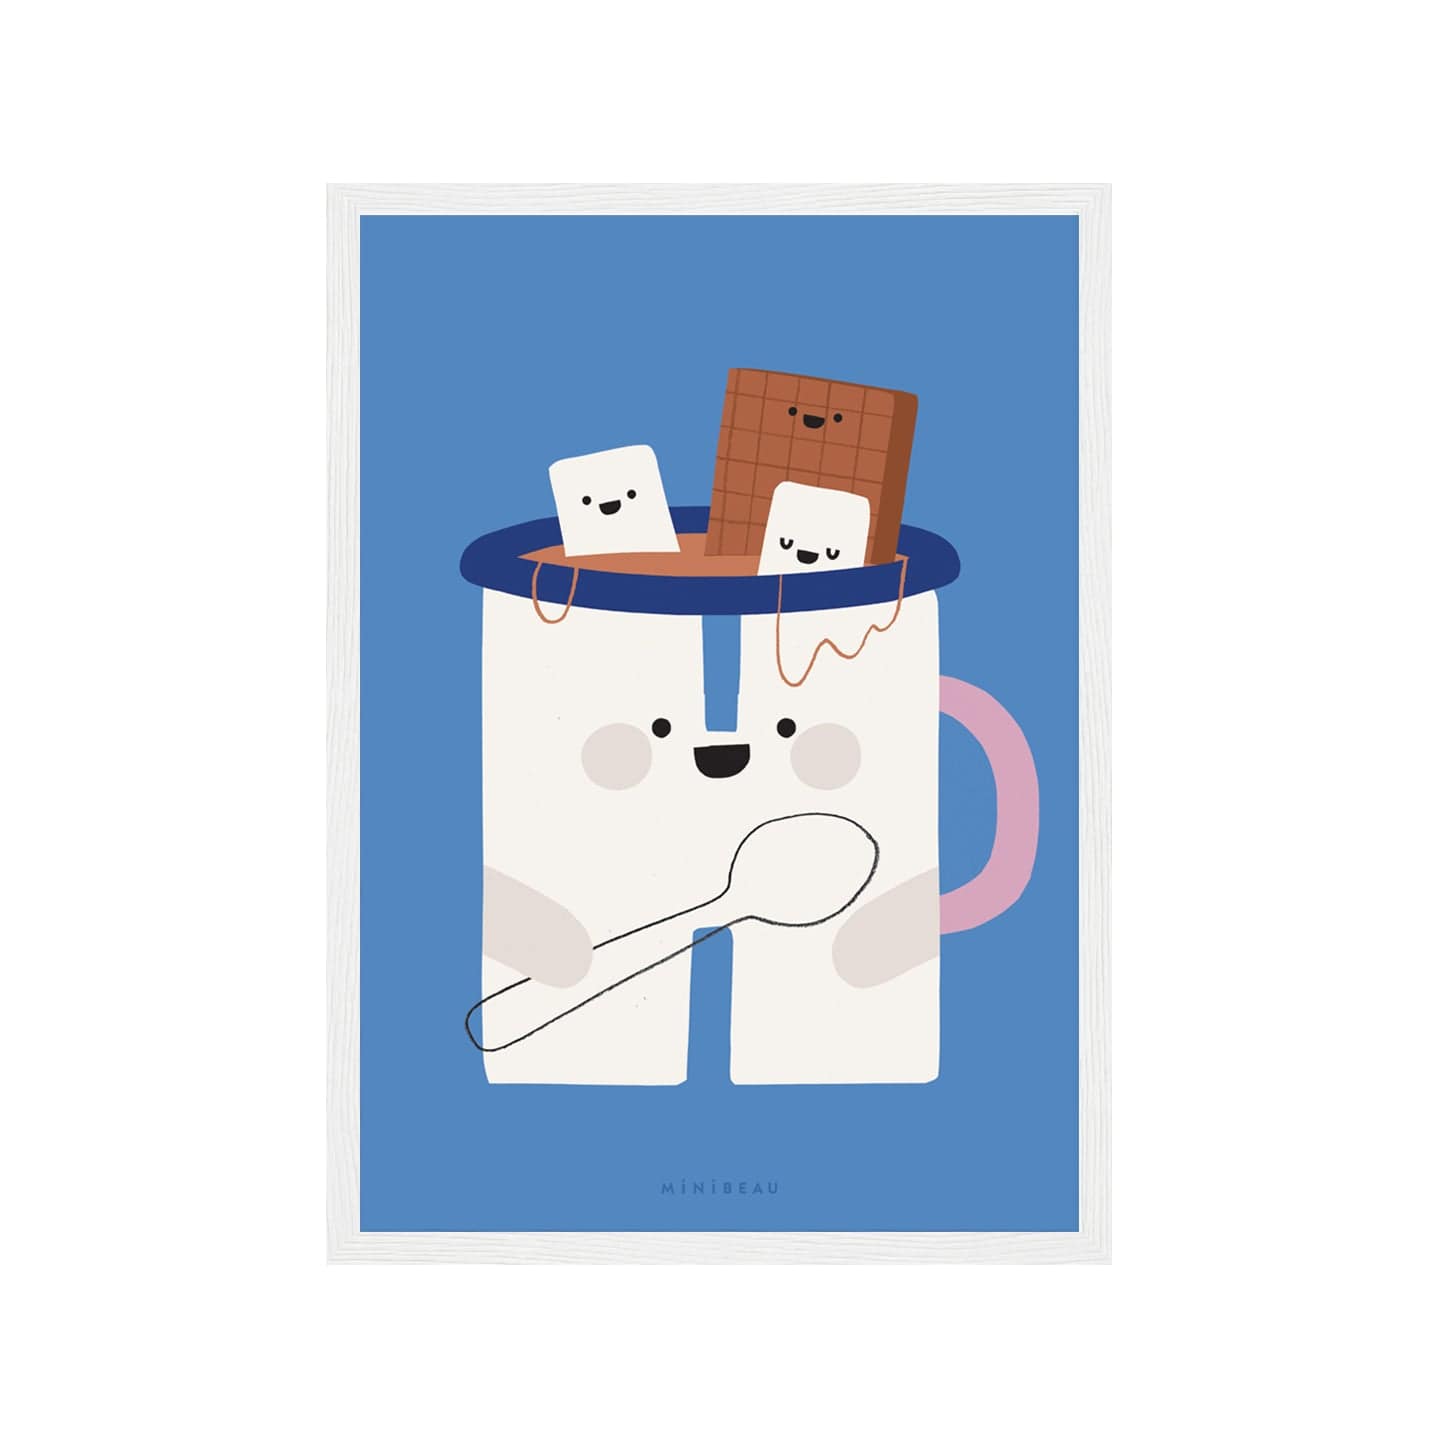 Art print in white frame. Our Happy Alphabet 'H' Art Print shows a smiling pink handled, white mug of hot chocolate, holding a spoon, with smiling marshmallows and chocolate bar sitting in the hot chocolate, on a blue background.